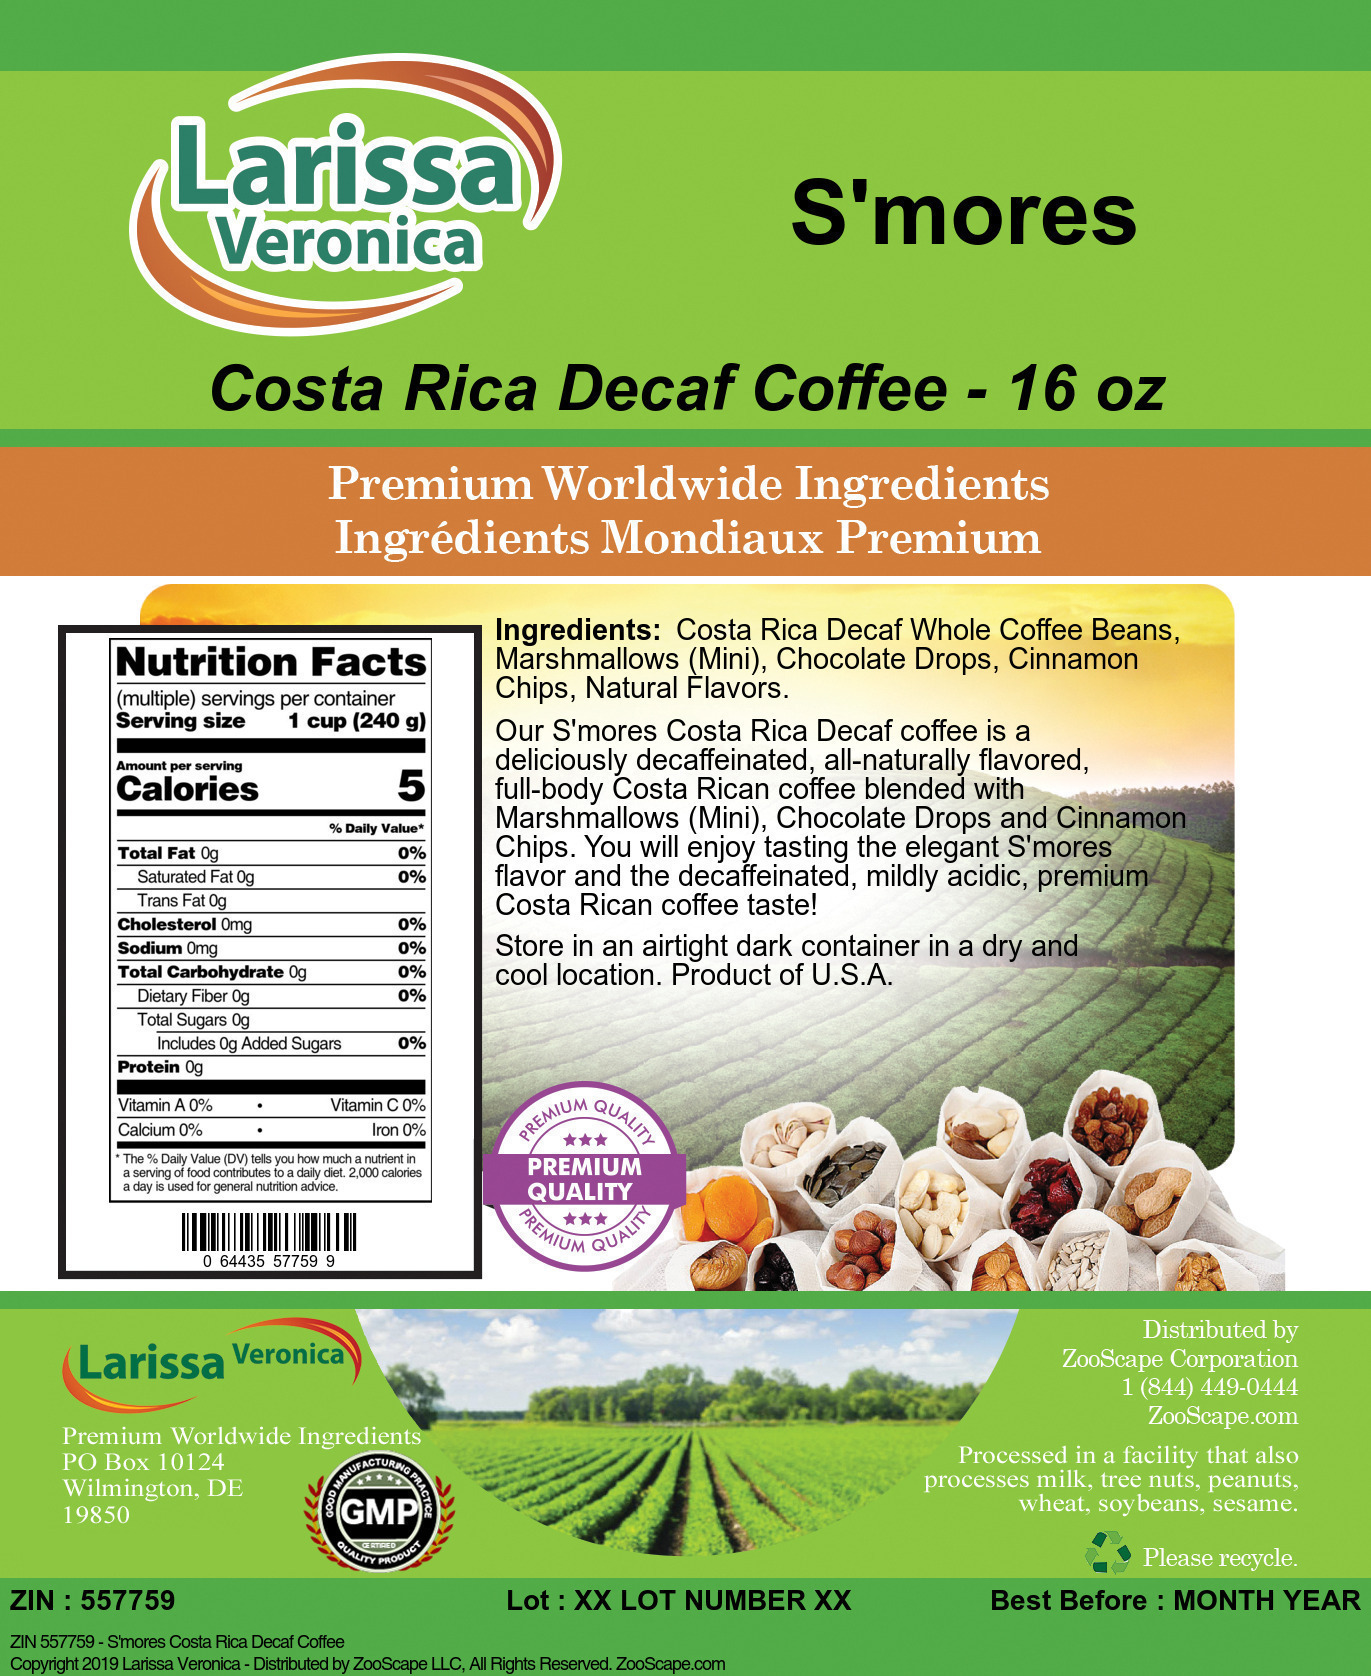 S'mores Costa Rica Decaf Coffee - Label